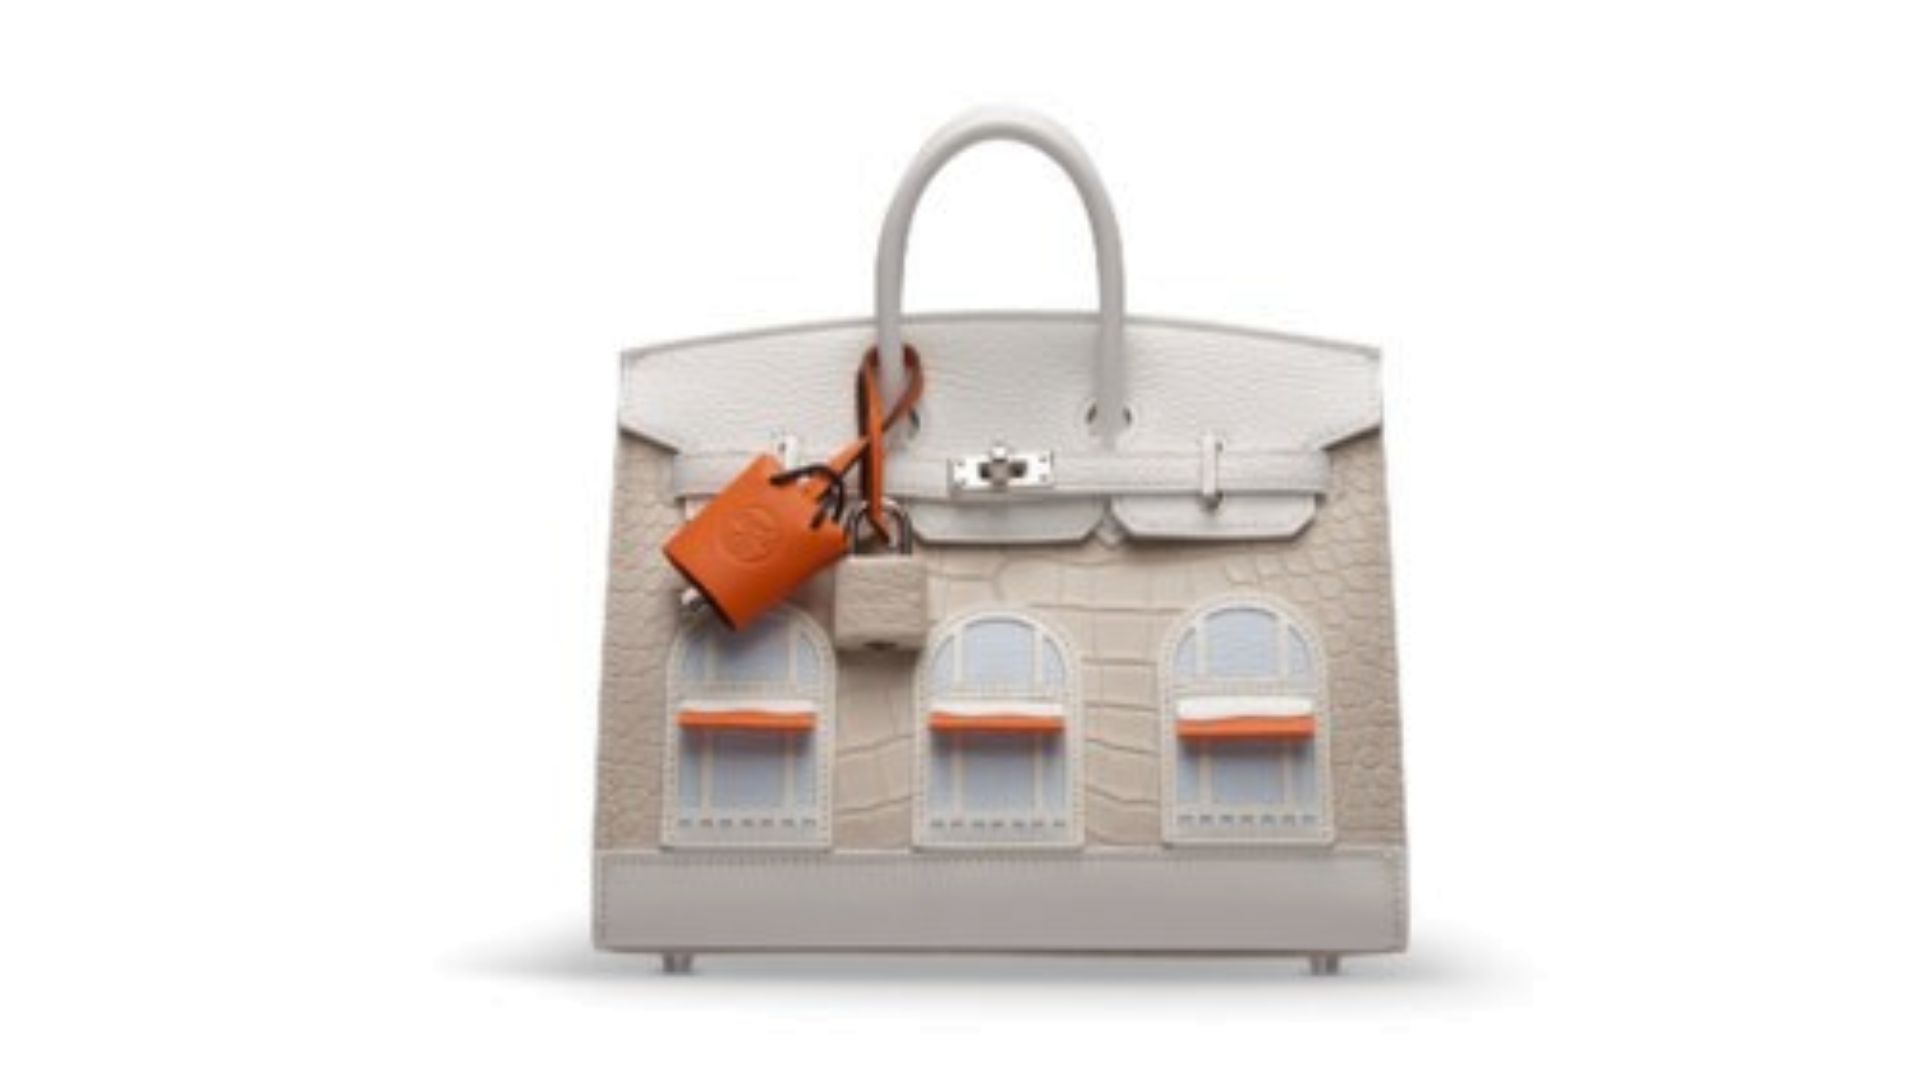 Meet the Limited Edition Birkin Faubourg